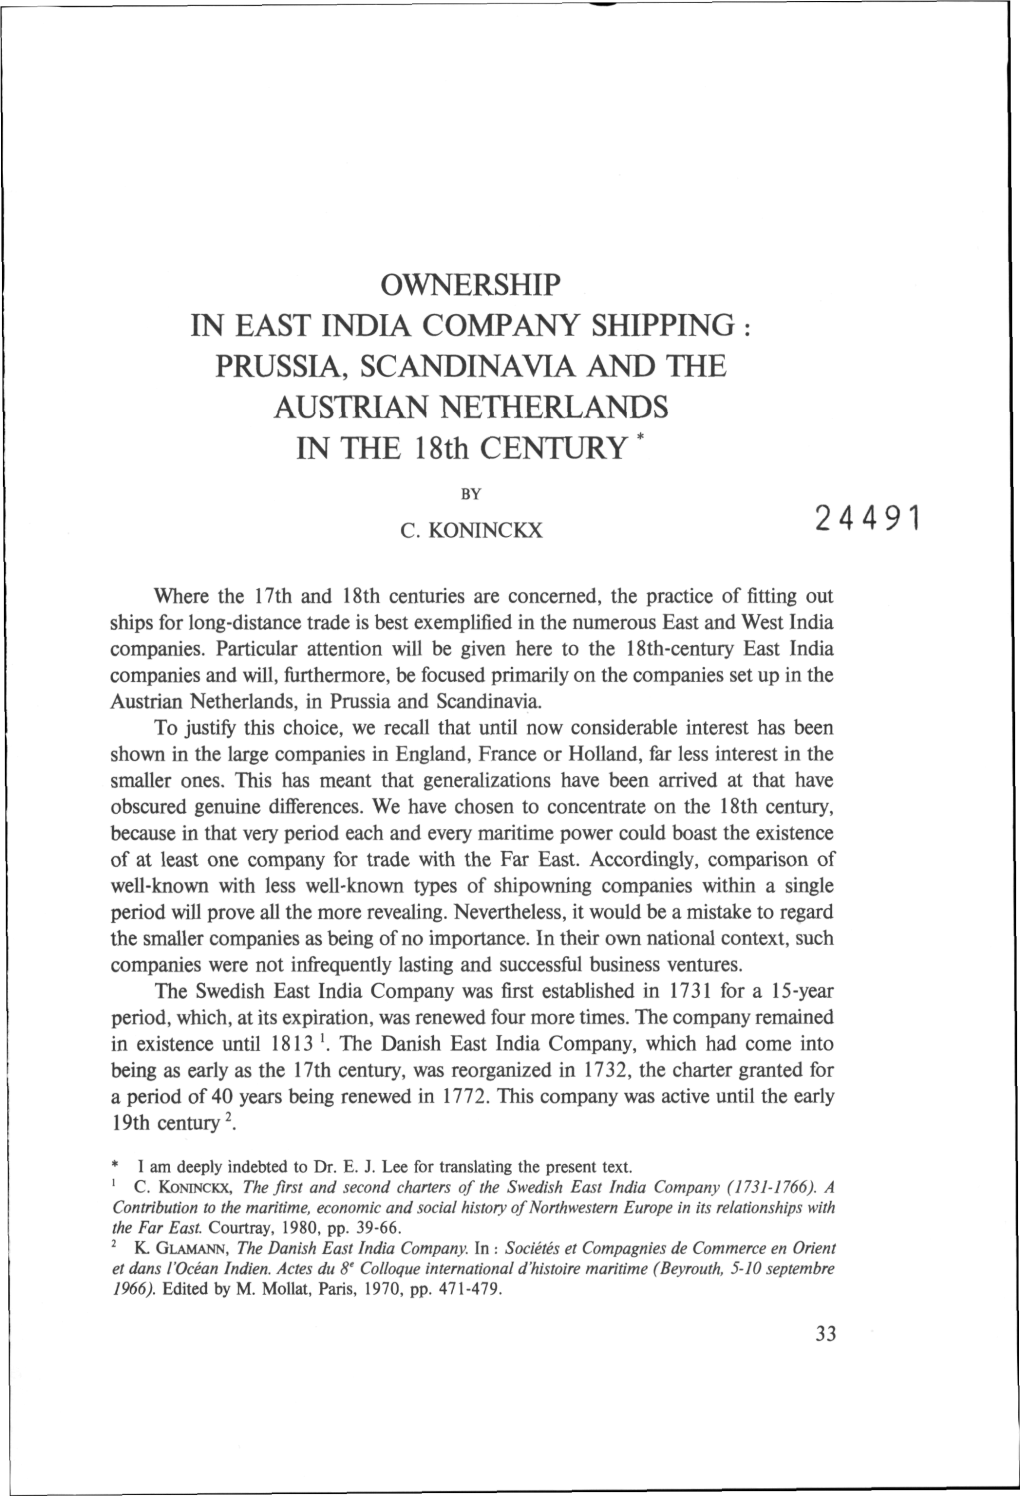 OWNERSHIP in EAST INDIA COMPANY SHIPPING : PRUSSIA, SCANDINAVIA and the AUSTRIAN NETHERLANDS in the 18Th CENTURY*